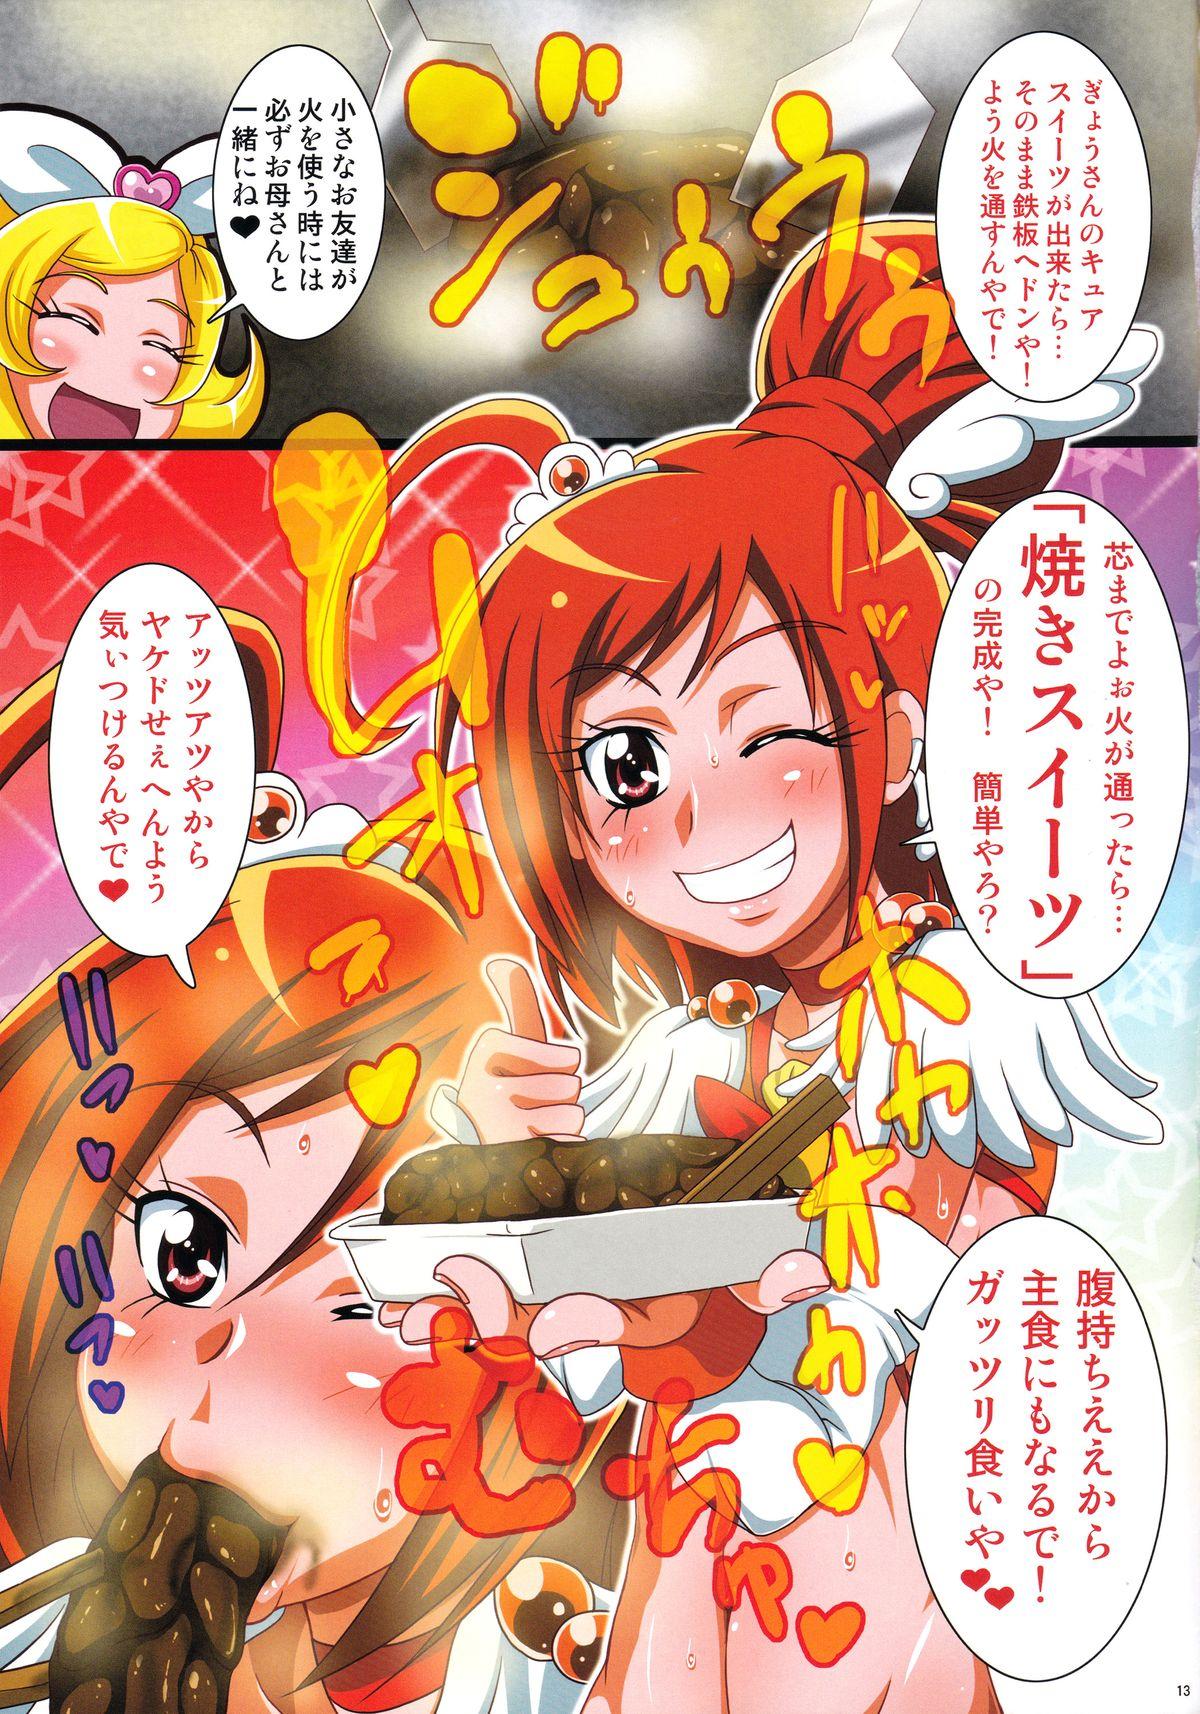 Shaved Irekubabon 2 - Pretty cure Suite precure Screaming - Page 12